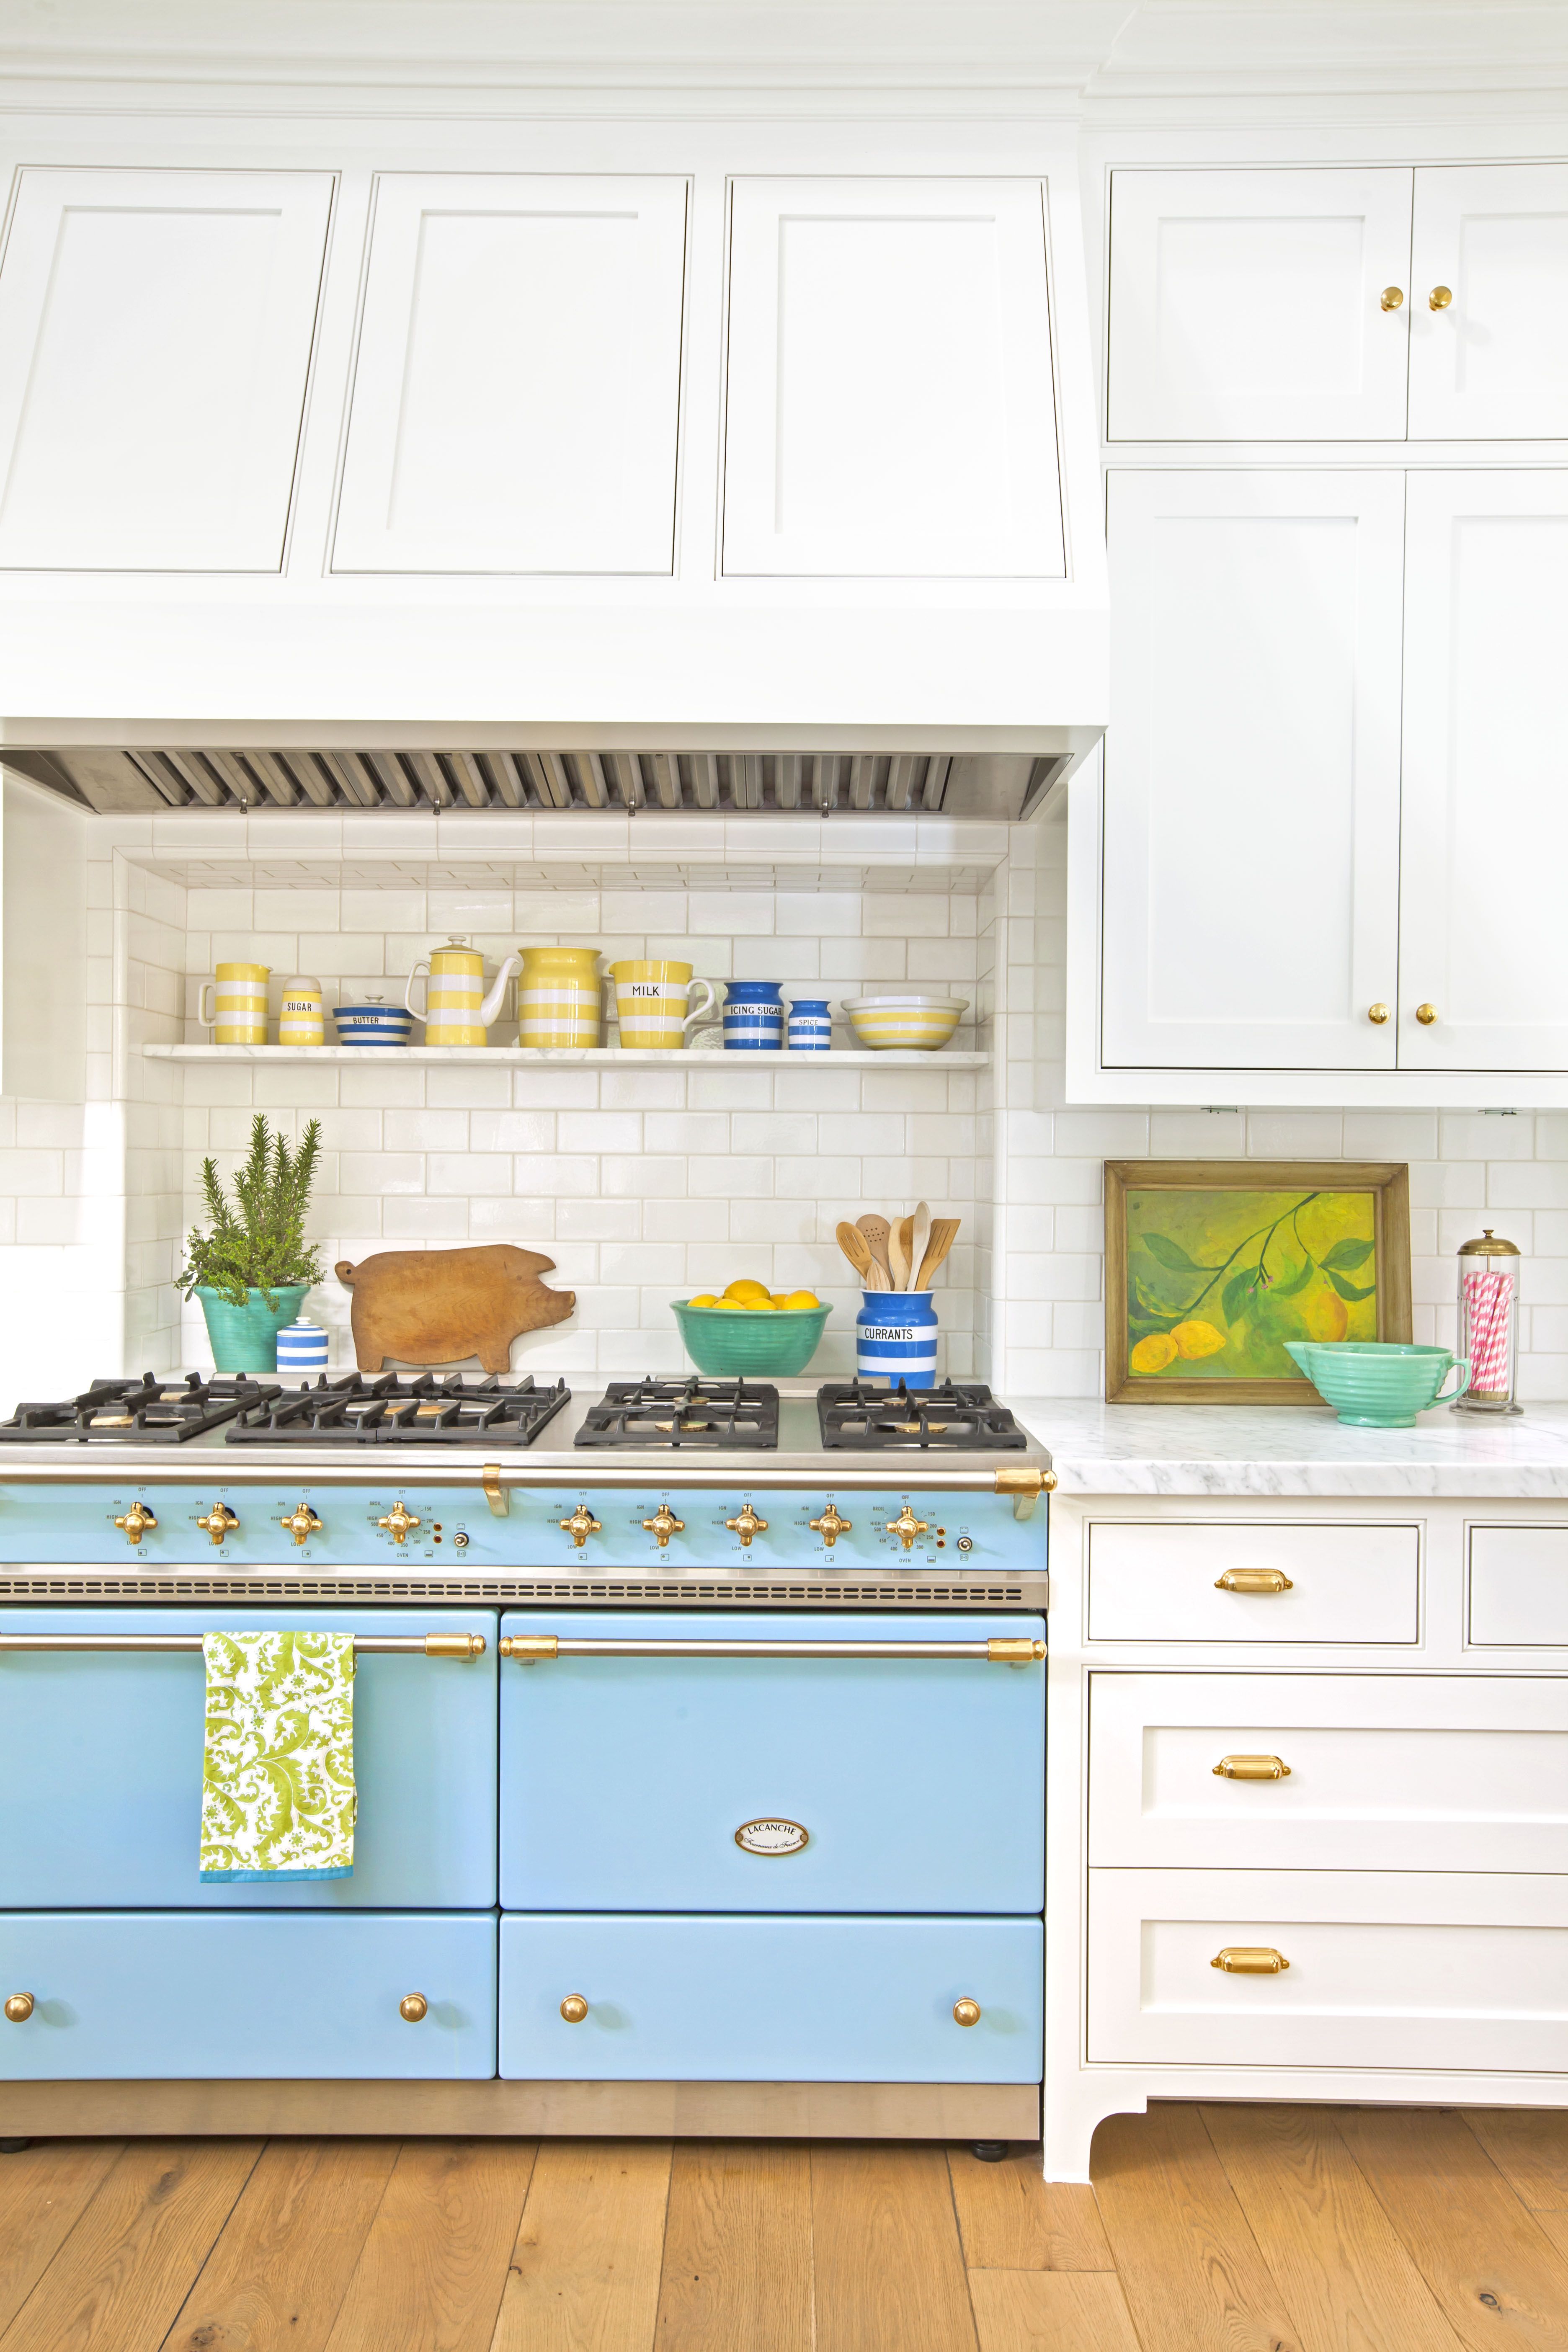 39 Kitchen Trends 2021 New Cabinet And Color Design Ideas